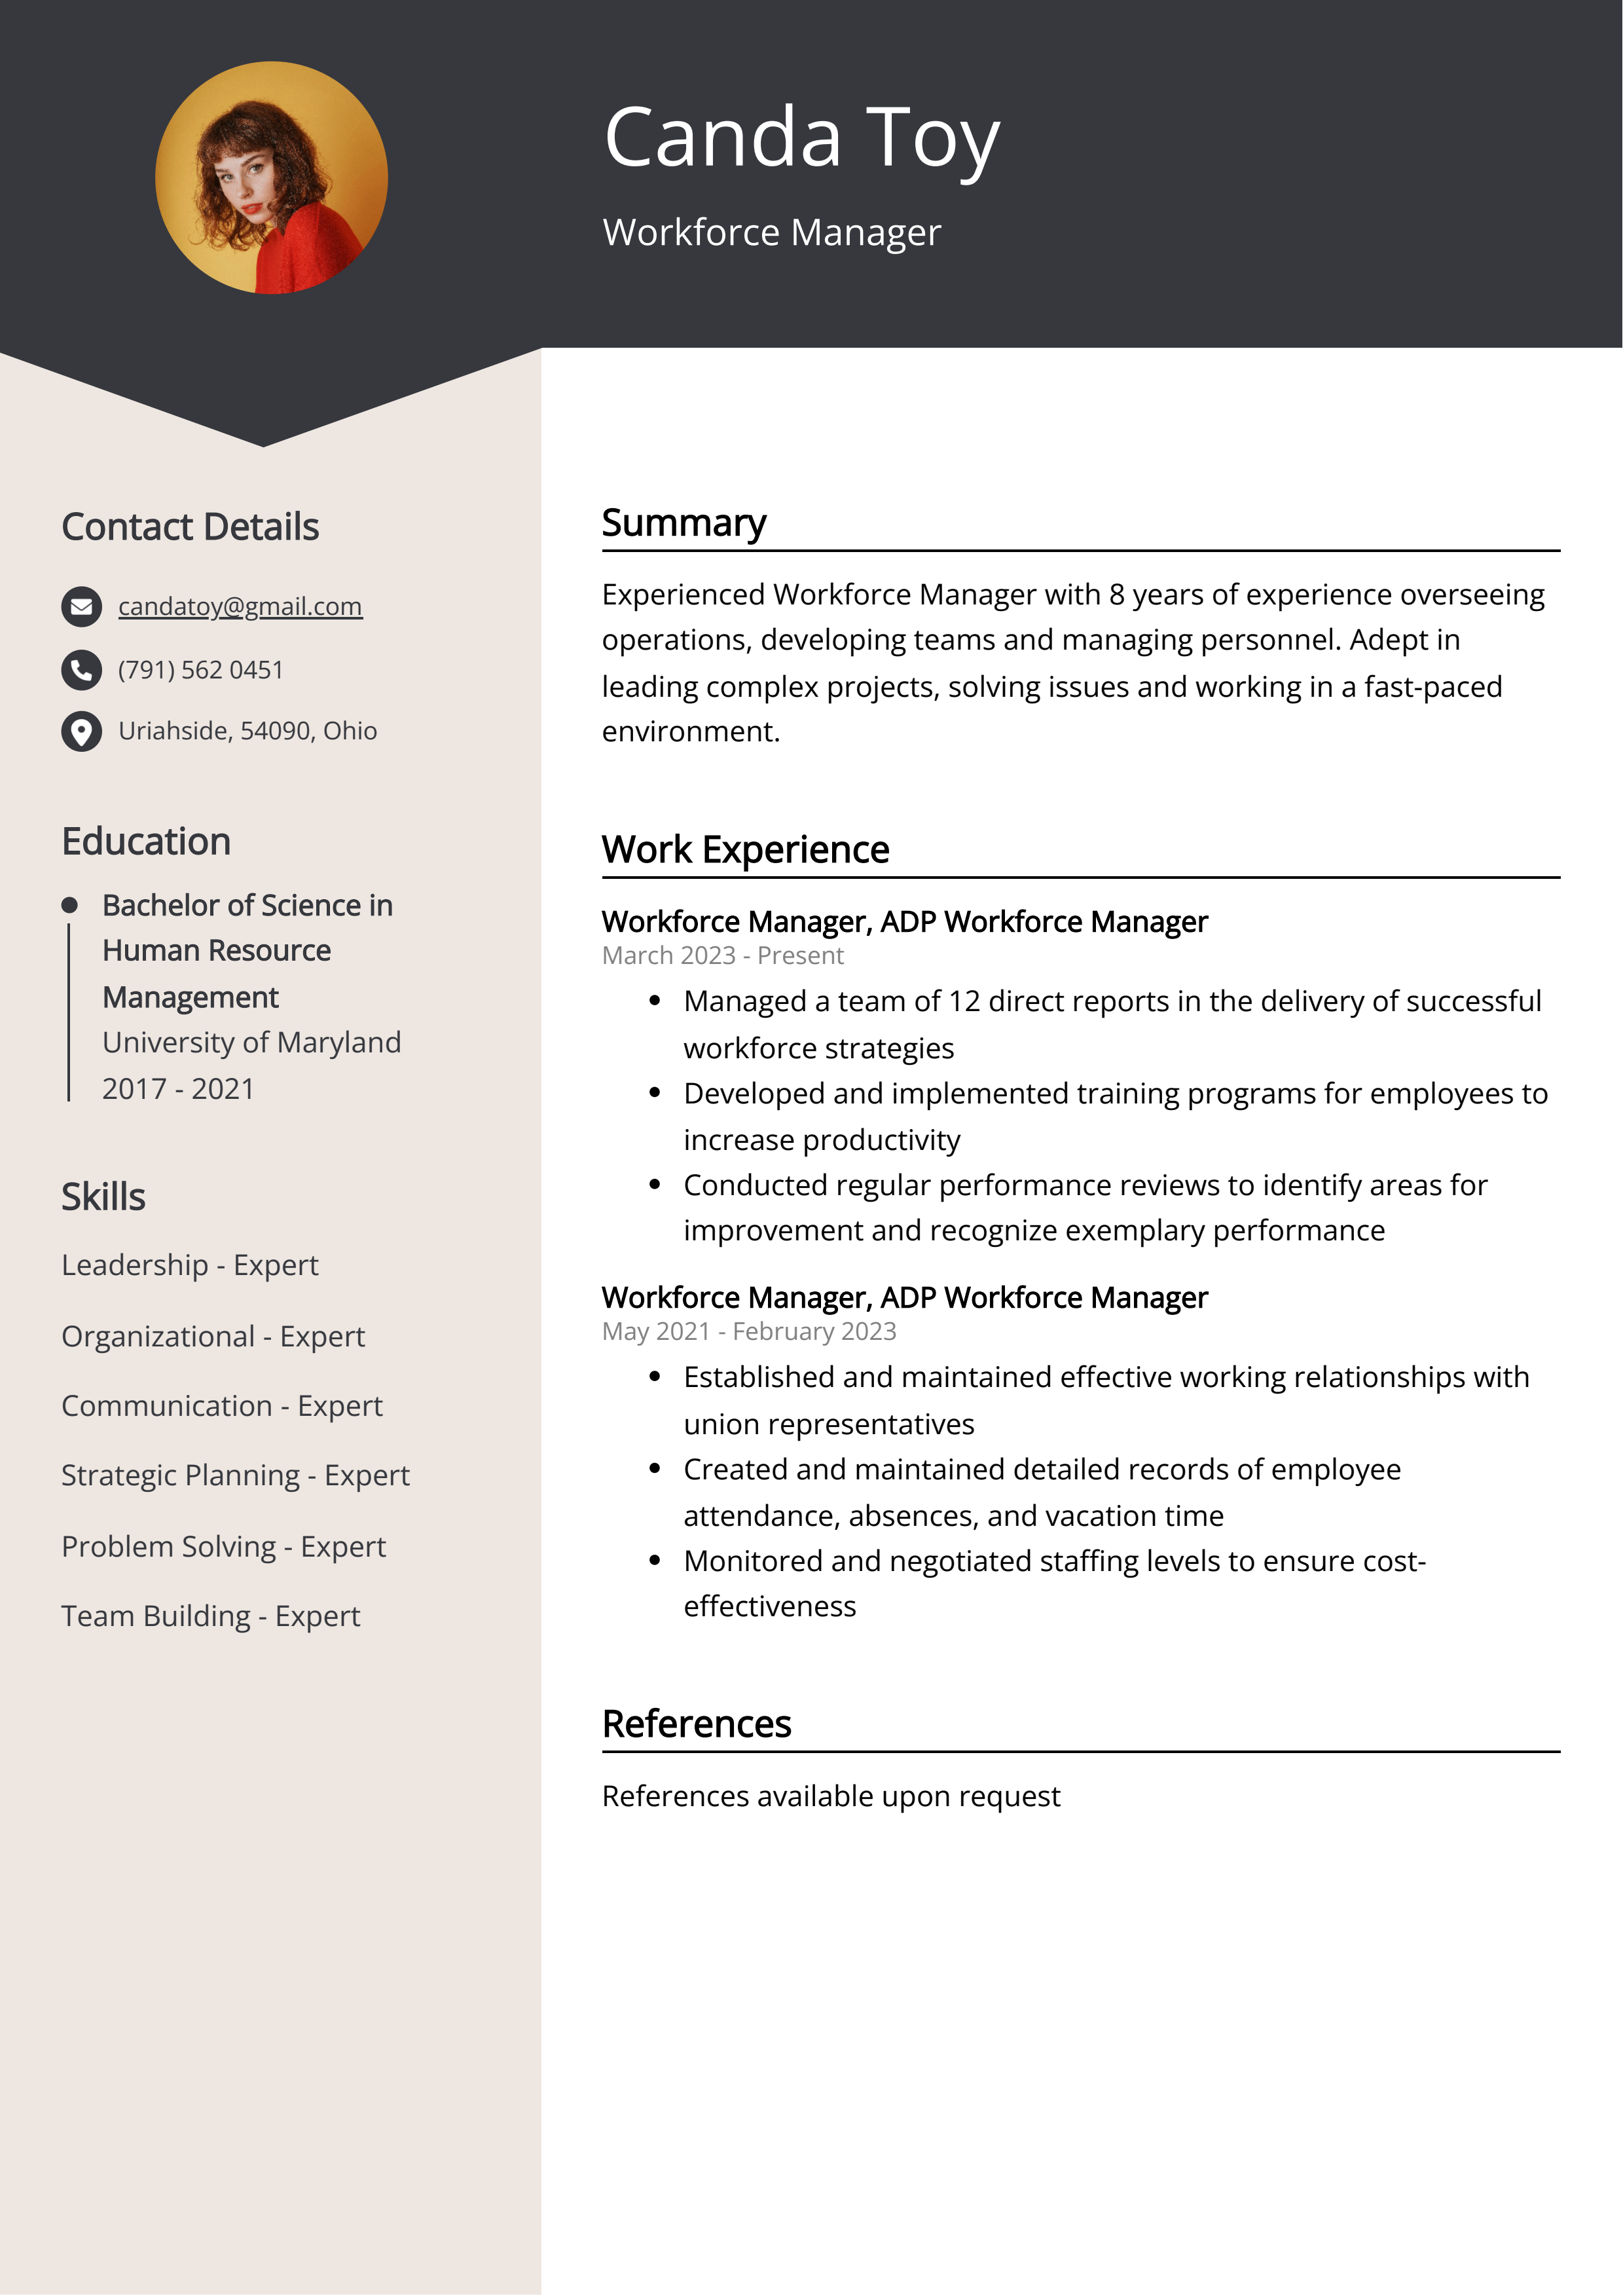 Workforce Manager CV Example